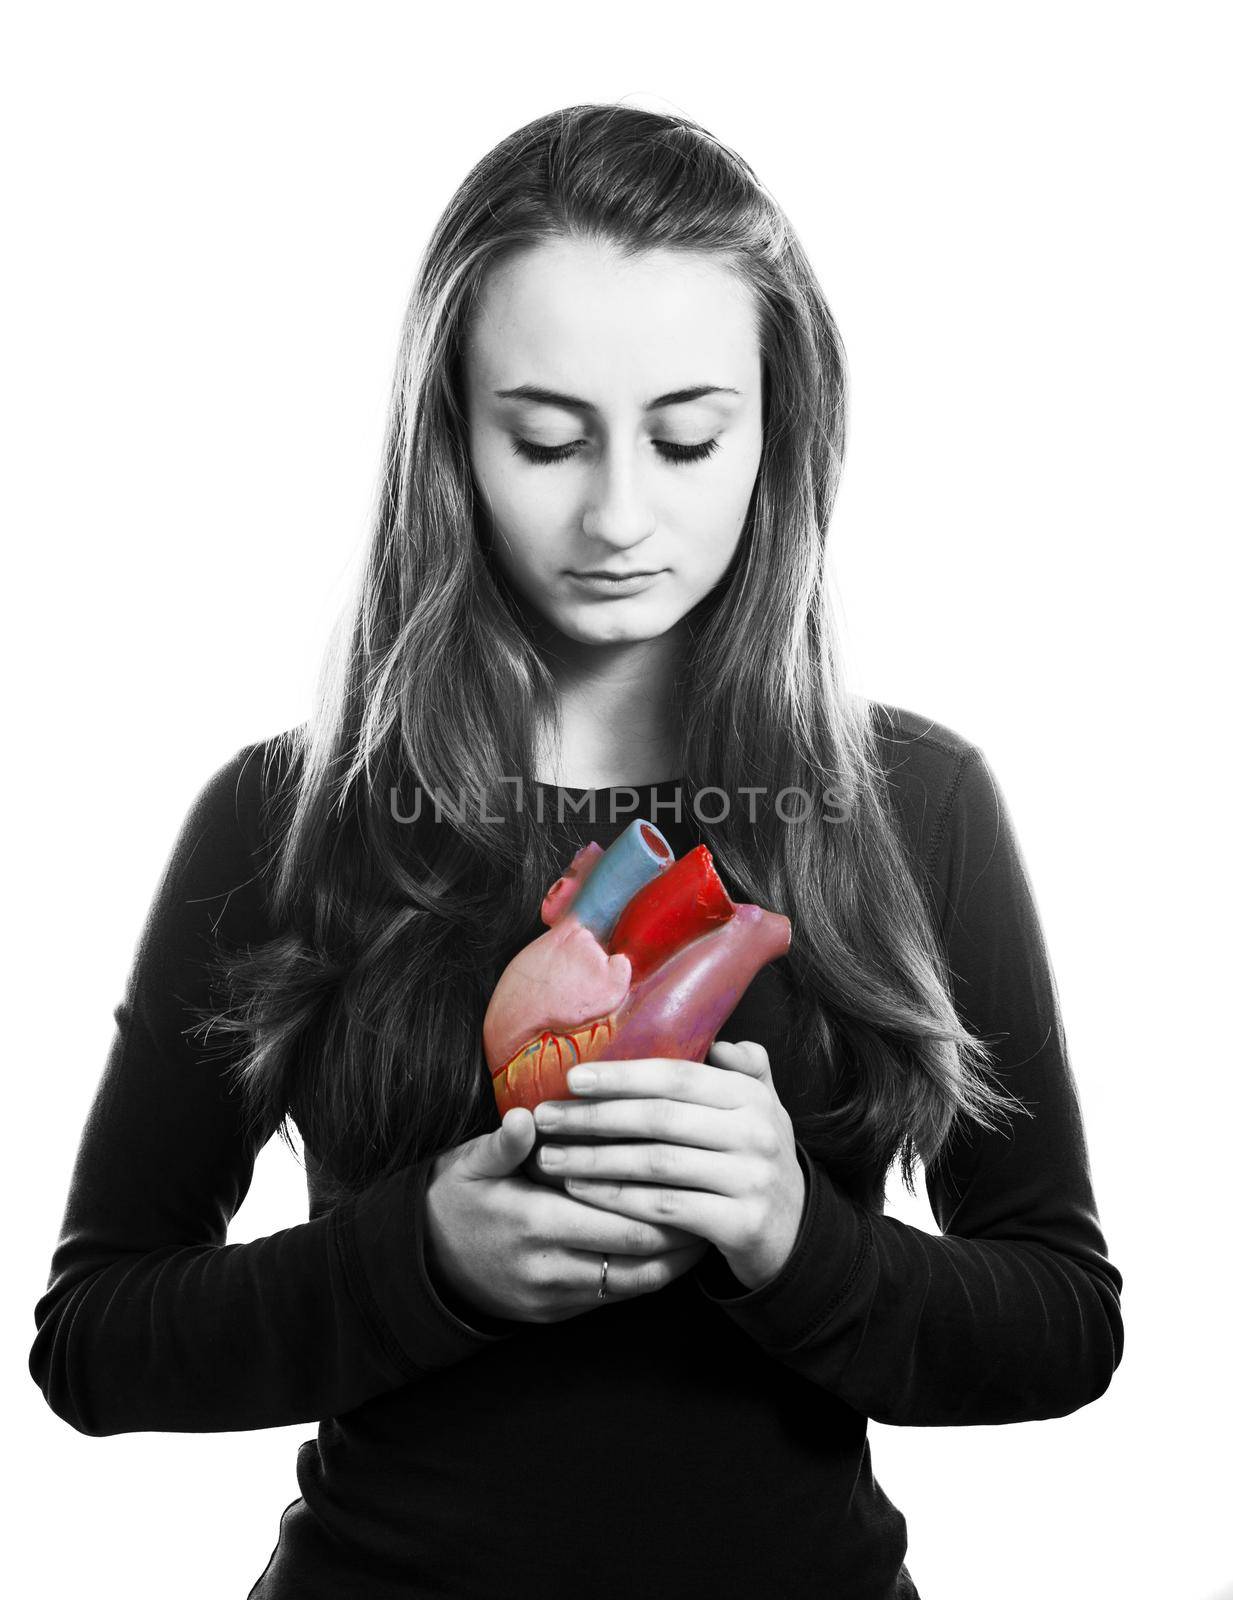 Young woman with heart in hand. Black and white image with local color on the heart